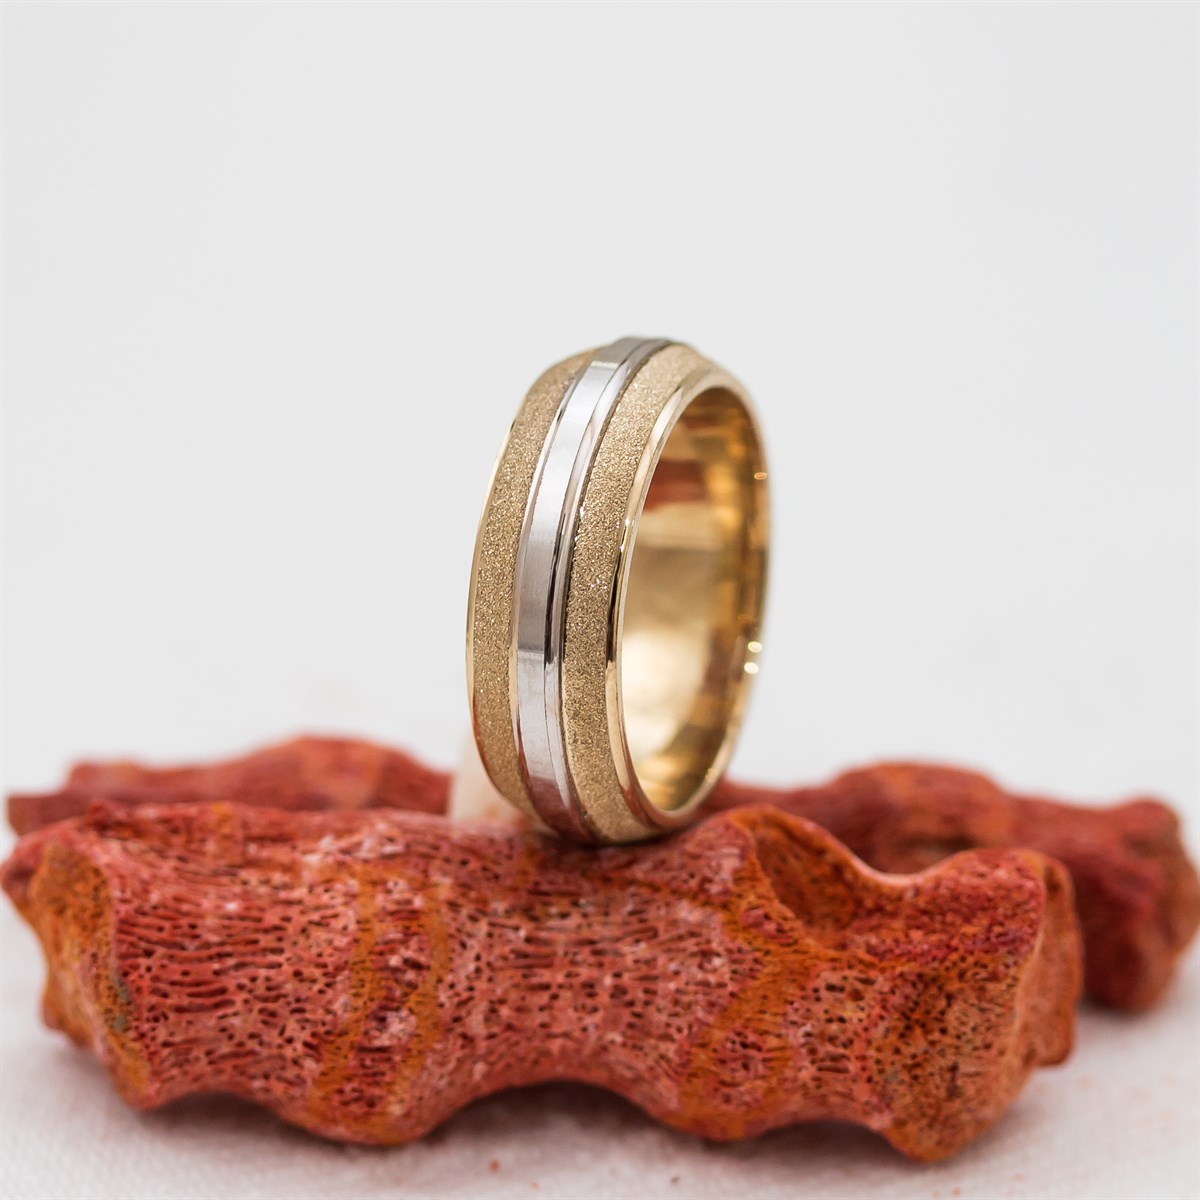 Unisex Sterling Silver Wedding Ring with Serrated Edges Gold Color